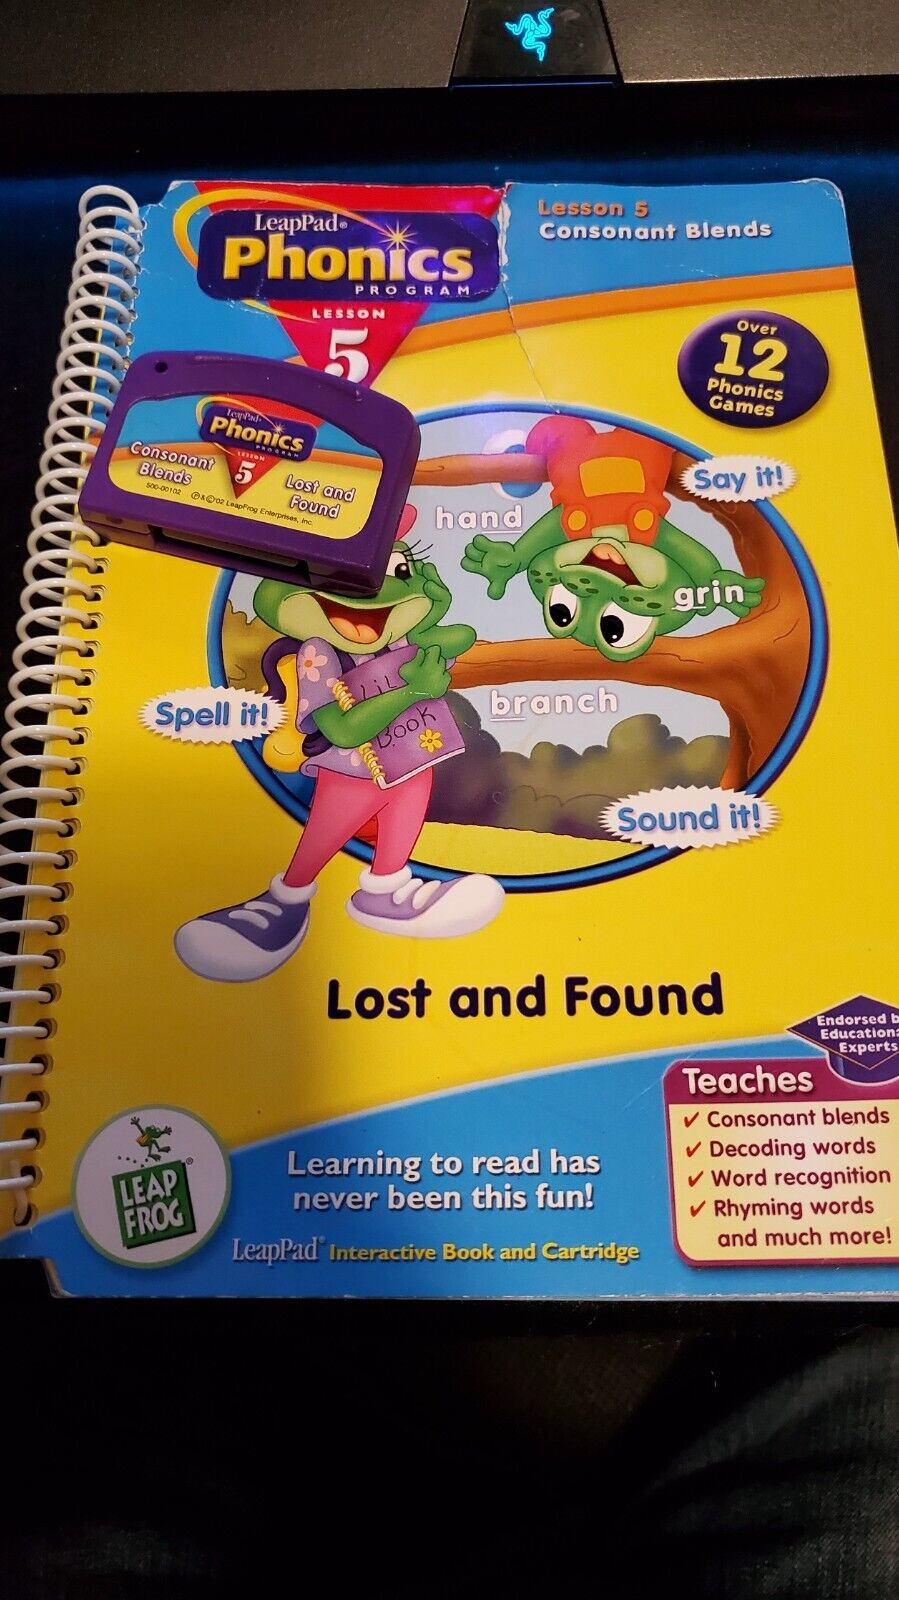 Leapfrog LeapPad Phonics Program Lesson 5 Lost And Found Game & Book